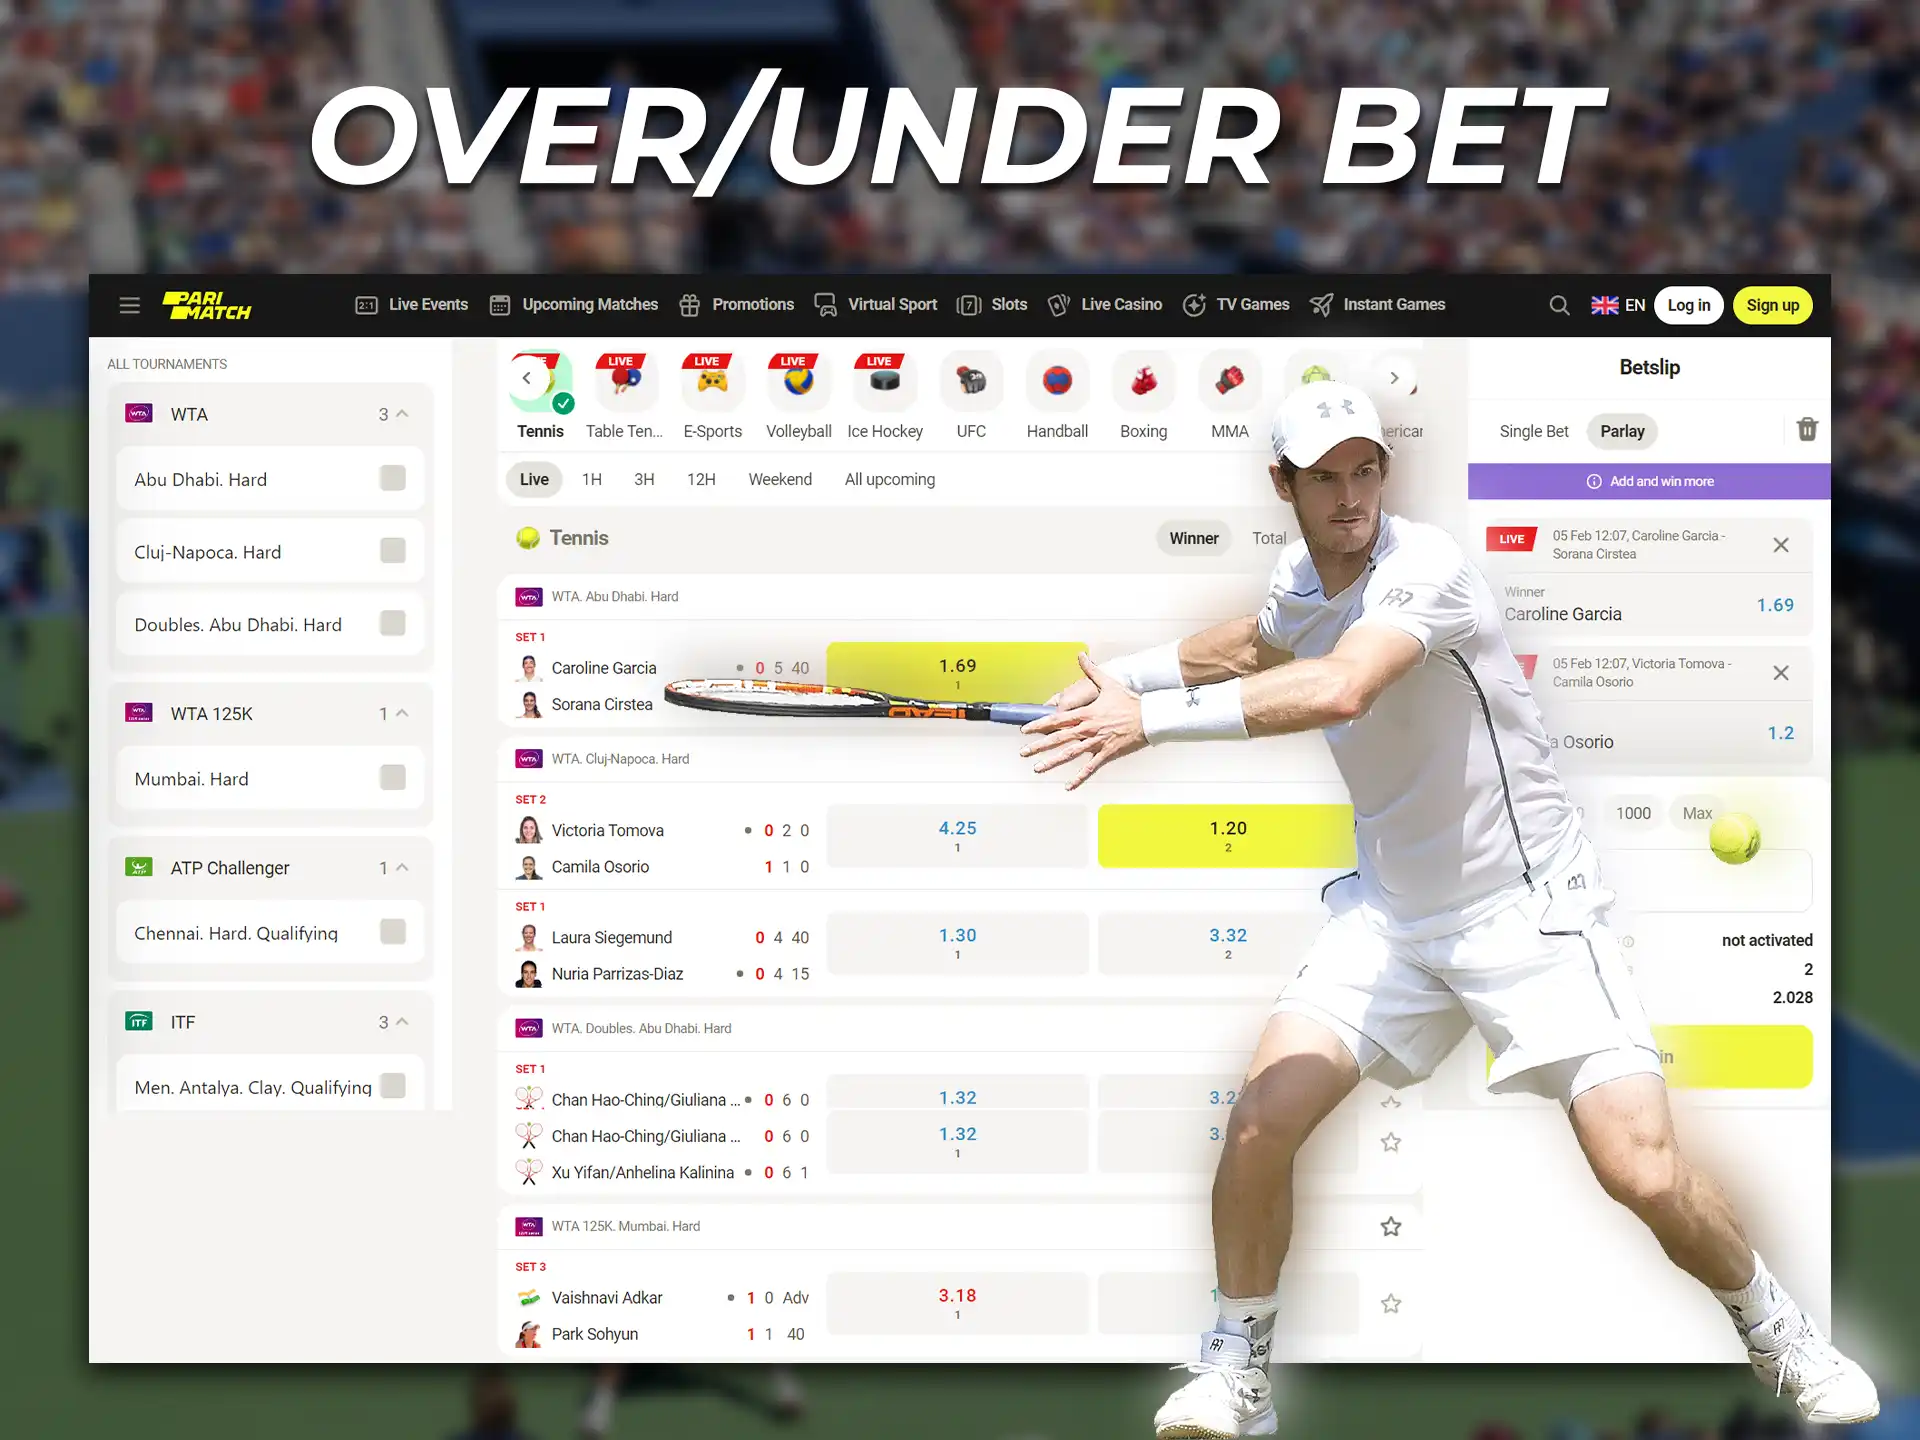 In an Over Under bet, you need to correctly predict how many games can be played in a match.